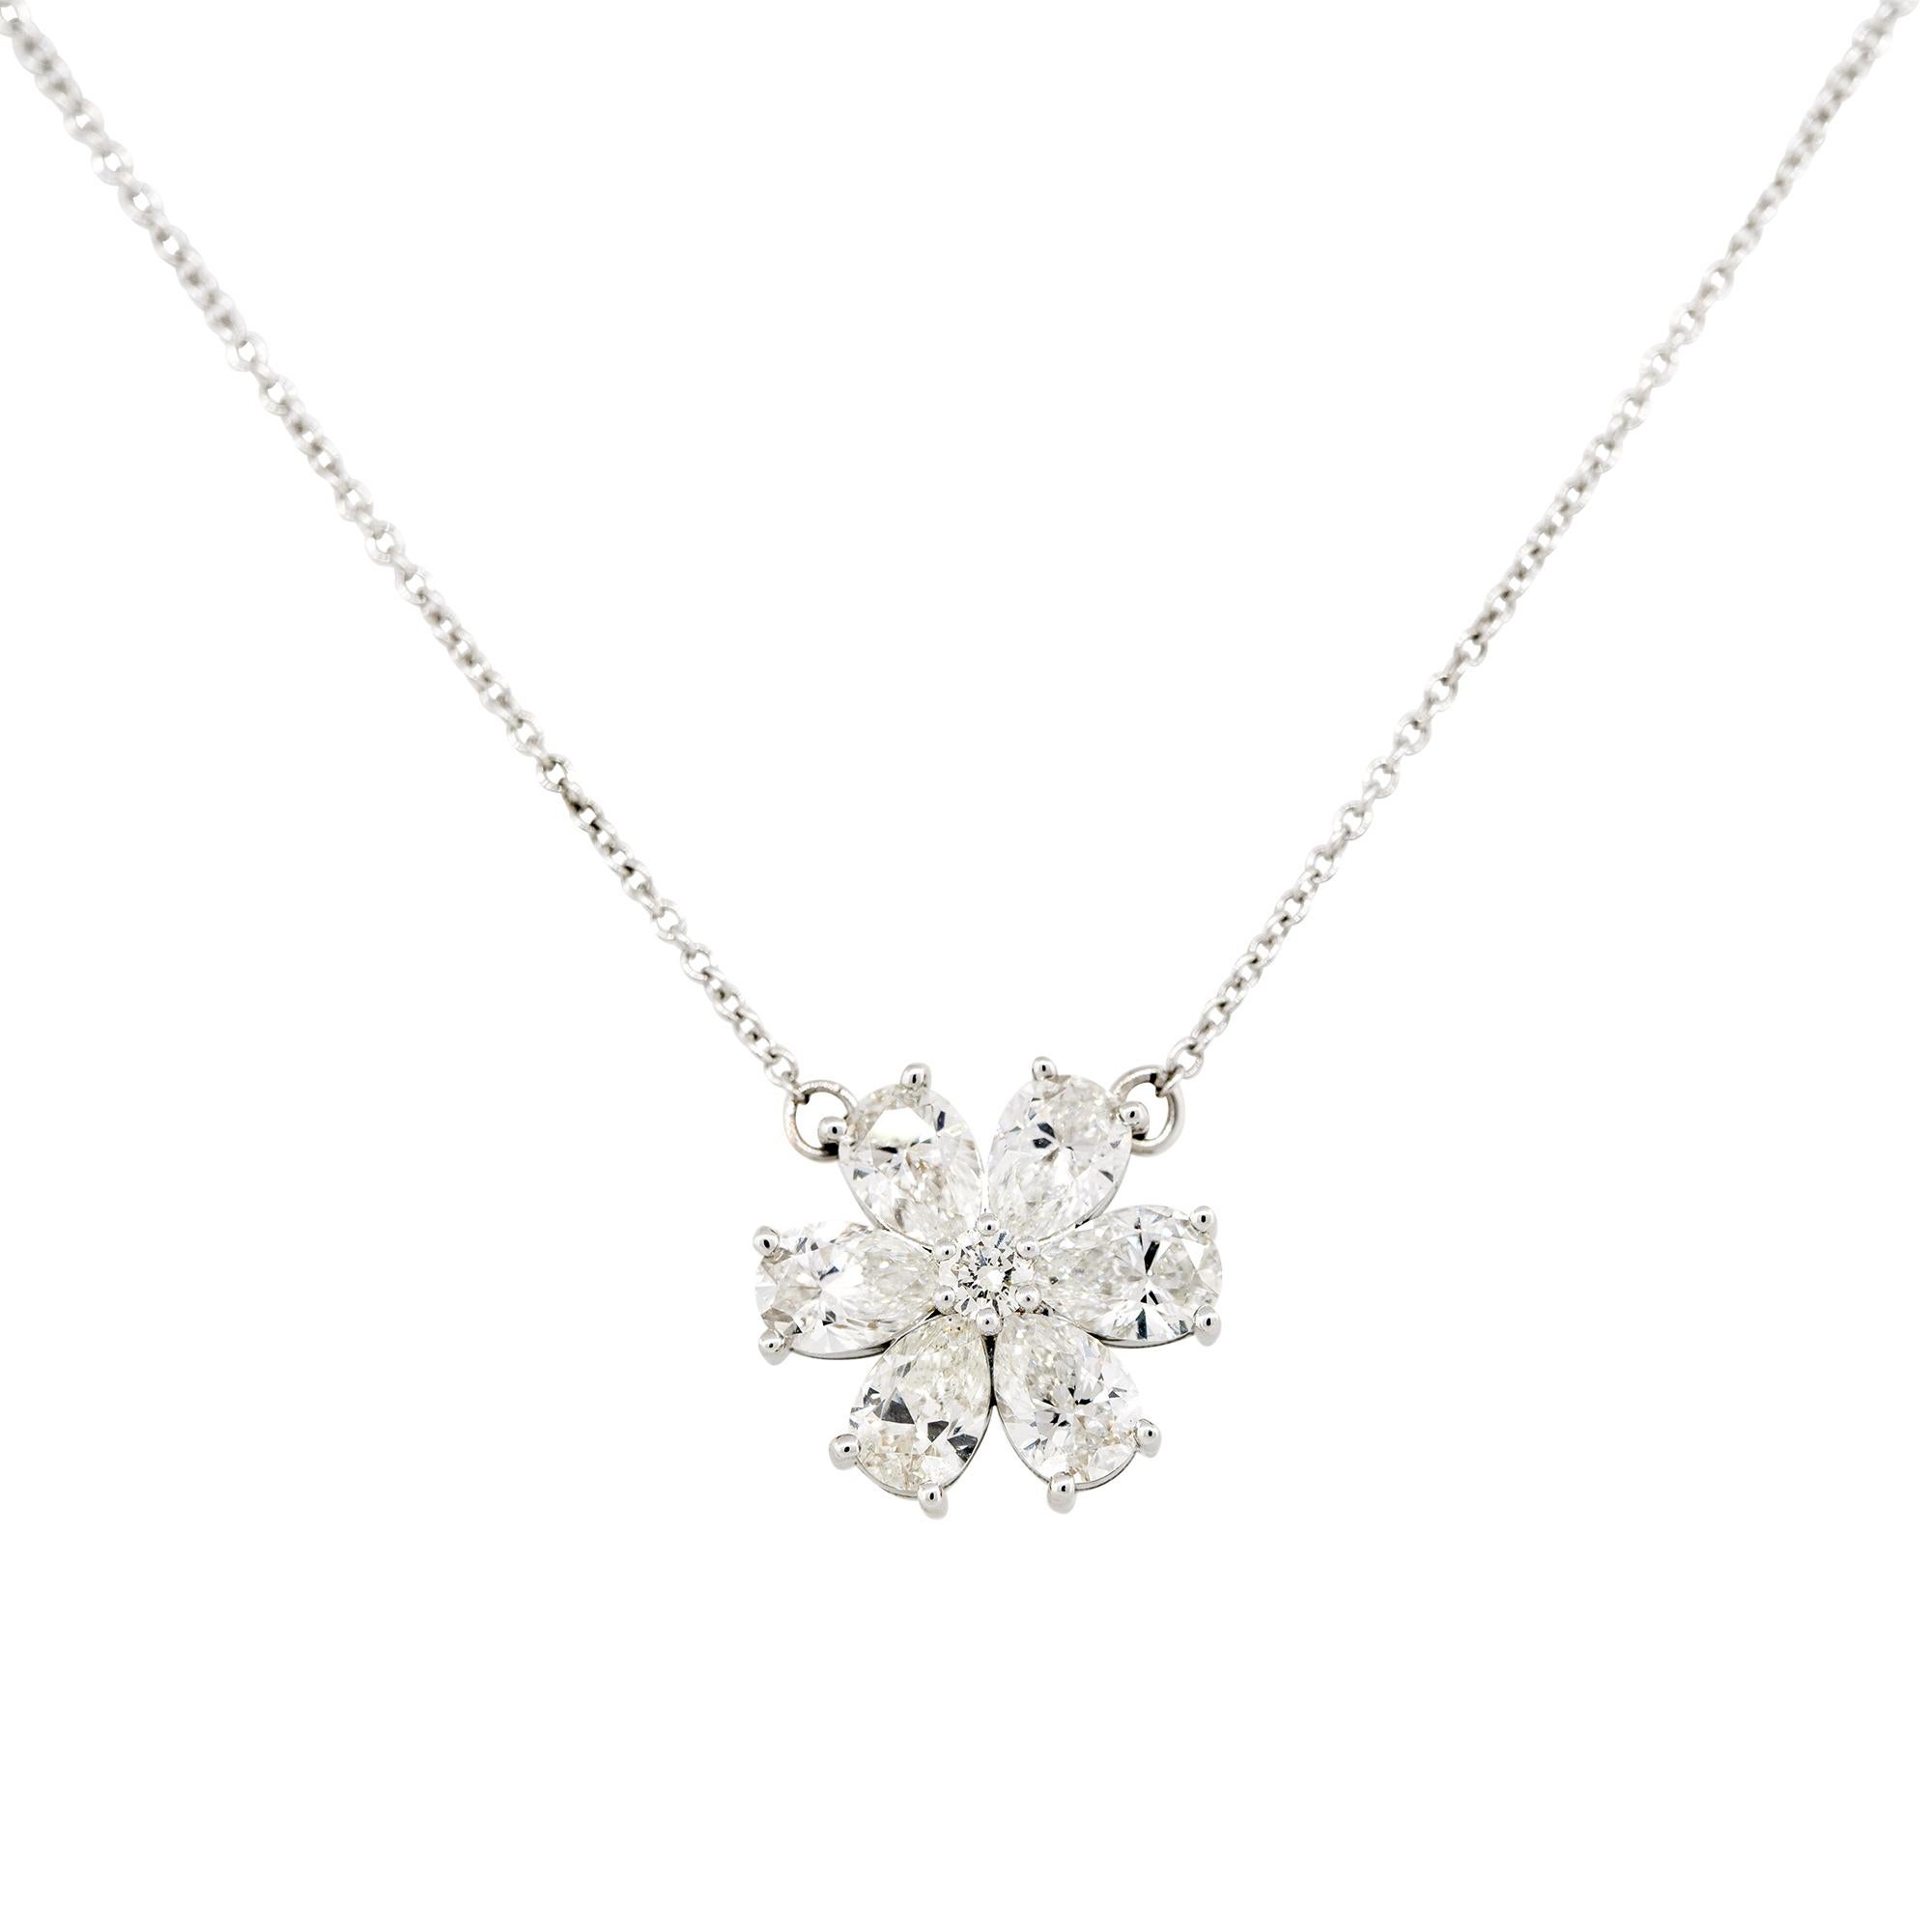 18k White Gold 3.01ctw Pear Shaped Diamond Flower Necklace
Material: 18k White Gold
Diamond Details: Approximately 3.01ctw of Pear shaped Diamonds. There is also a round brilliant diamond in the center of the flower. All diamonds are approximately